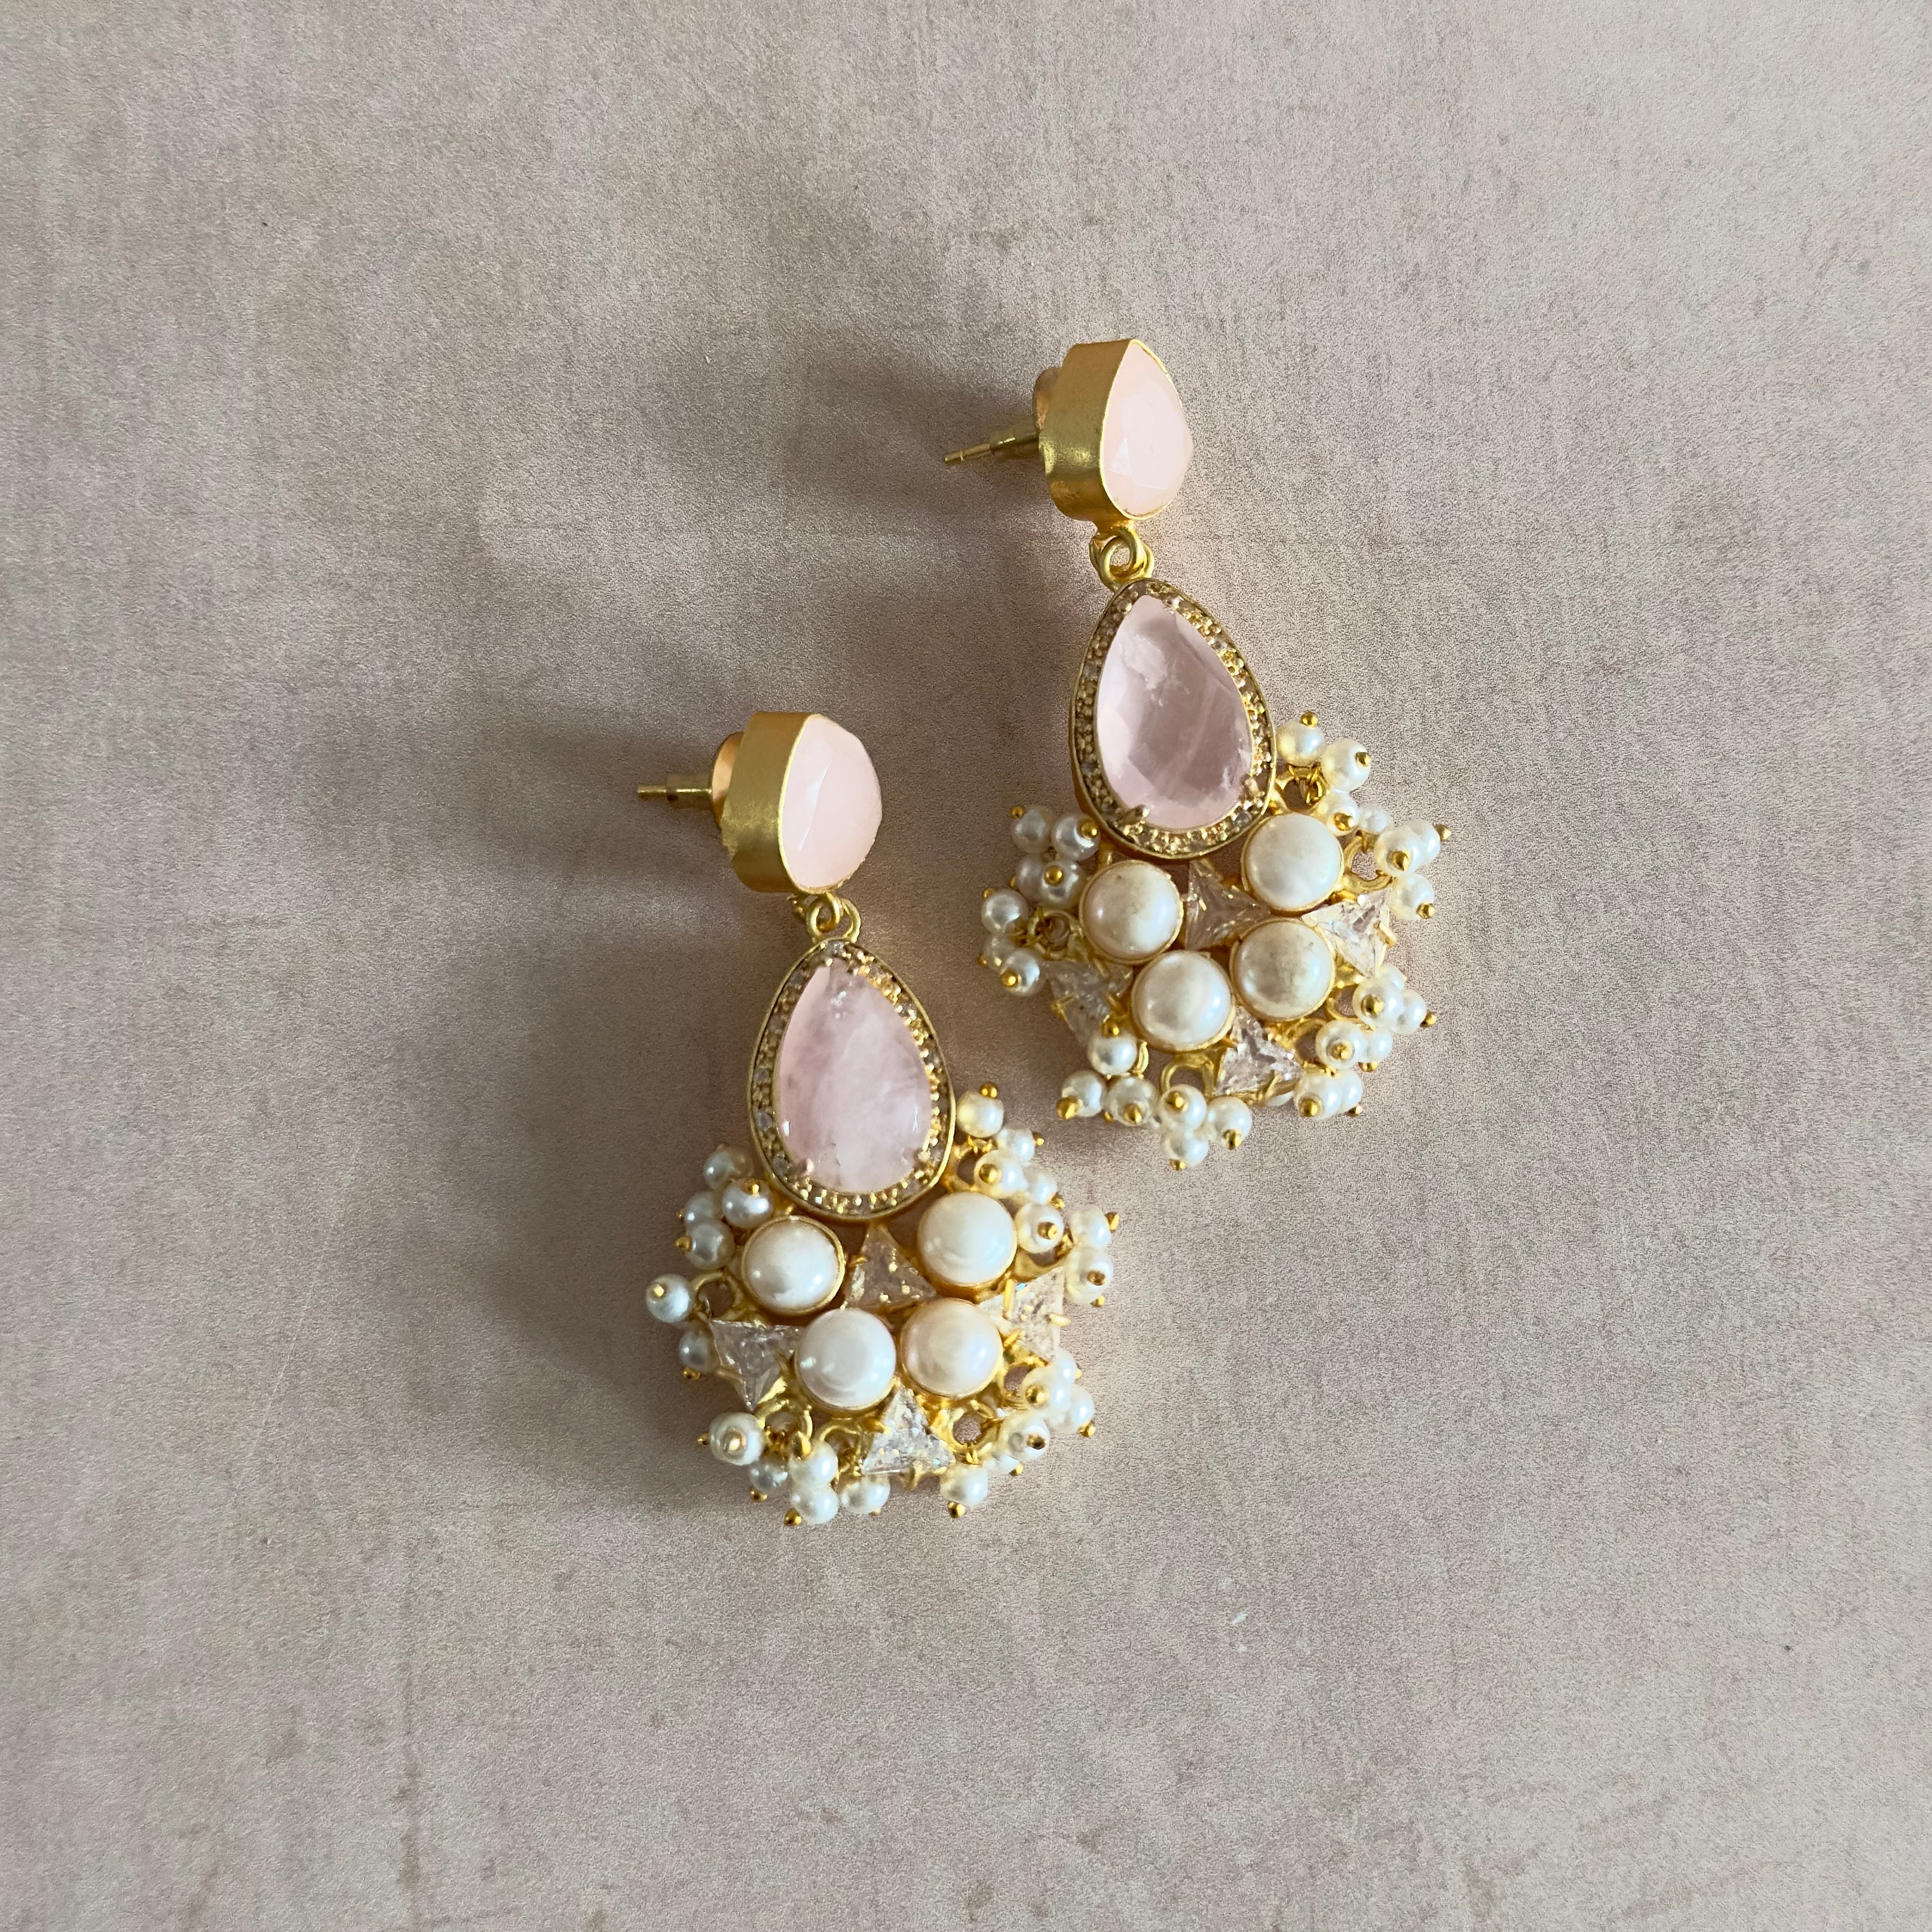 Add a touch of elegance with our Romee Pink Pearl Drop Earrings. Made with beautiful rose quartz, freshwater pearls, and delicate crystal details, these earrings exude grace and sophistication. Elevate your style and make a statement with our stunning and timeless pieces.